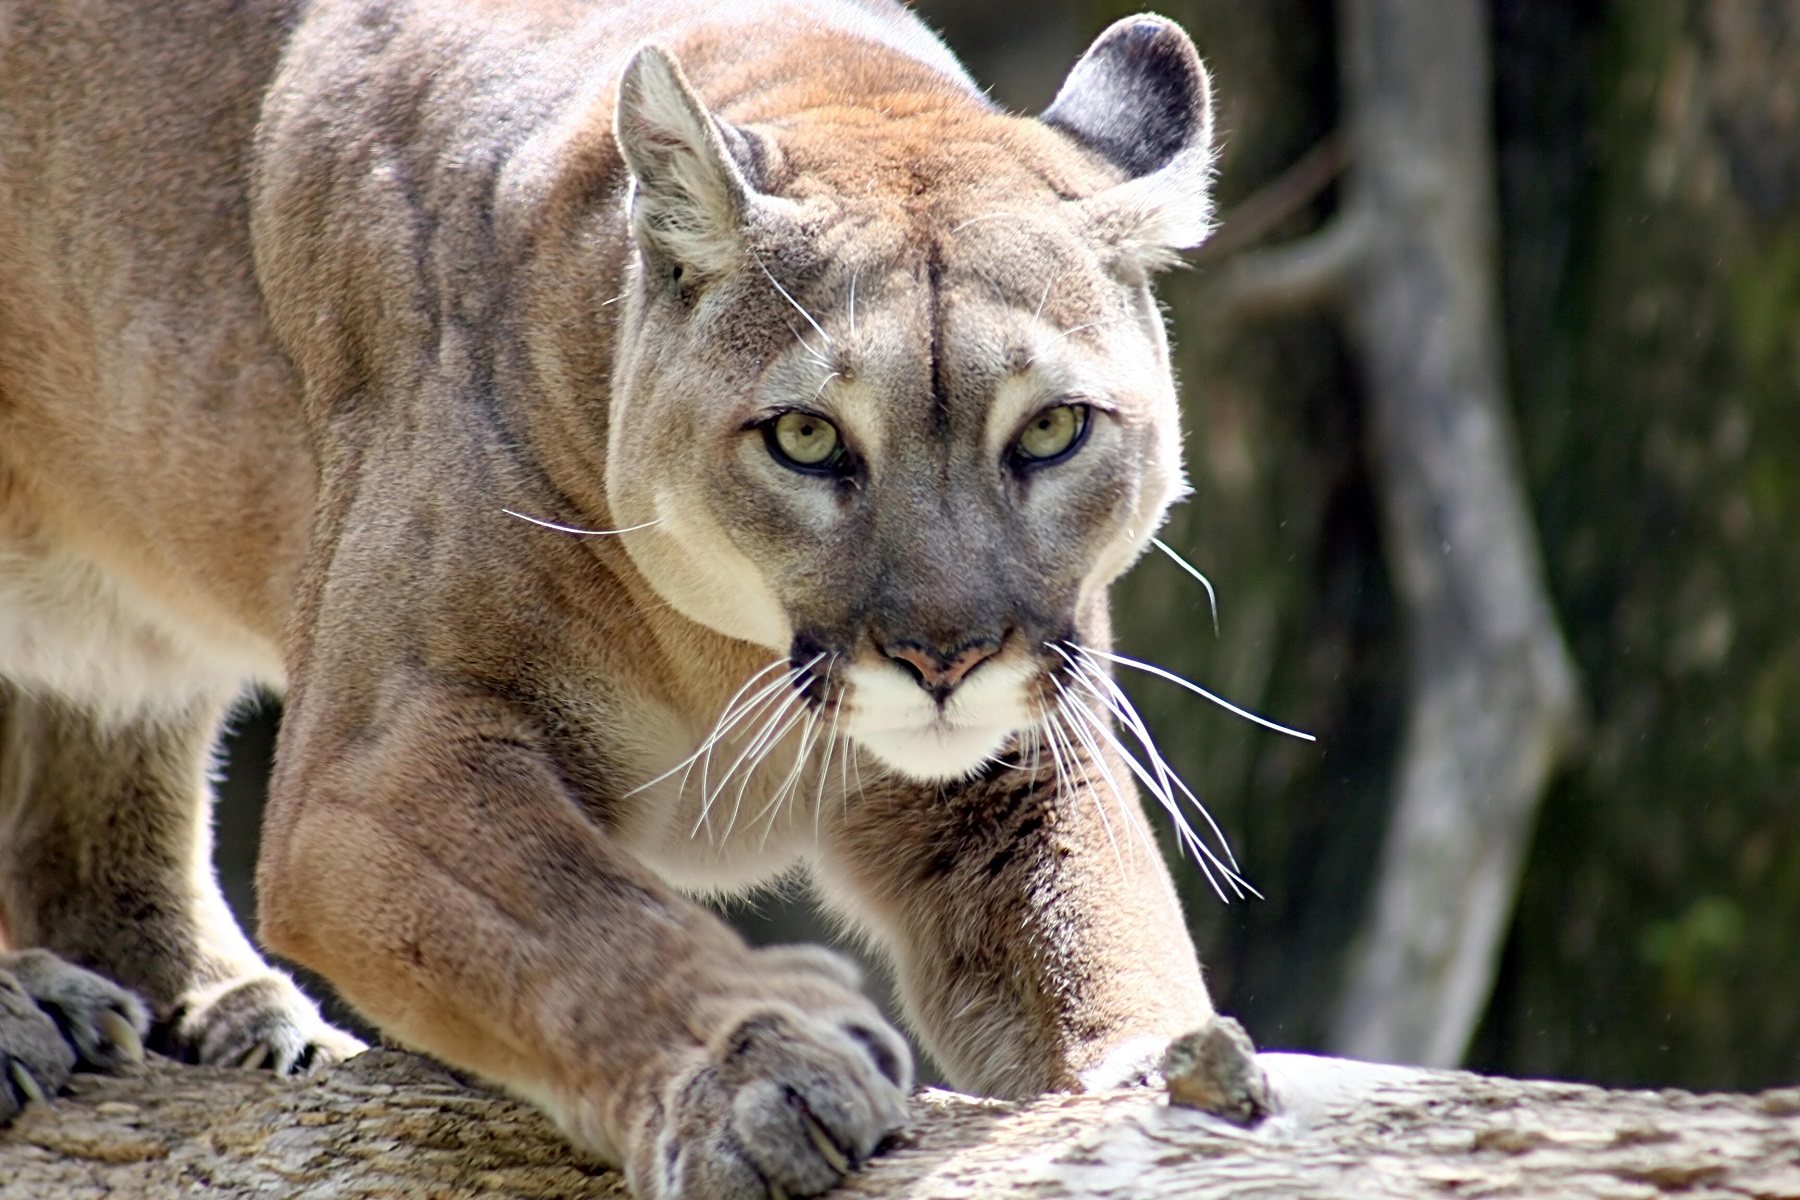 Mountain Lion Savages Family Dog in Backyard Moments After Kids Went Inside